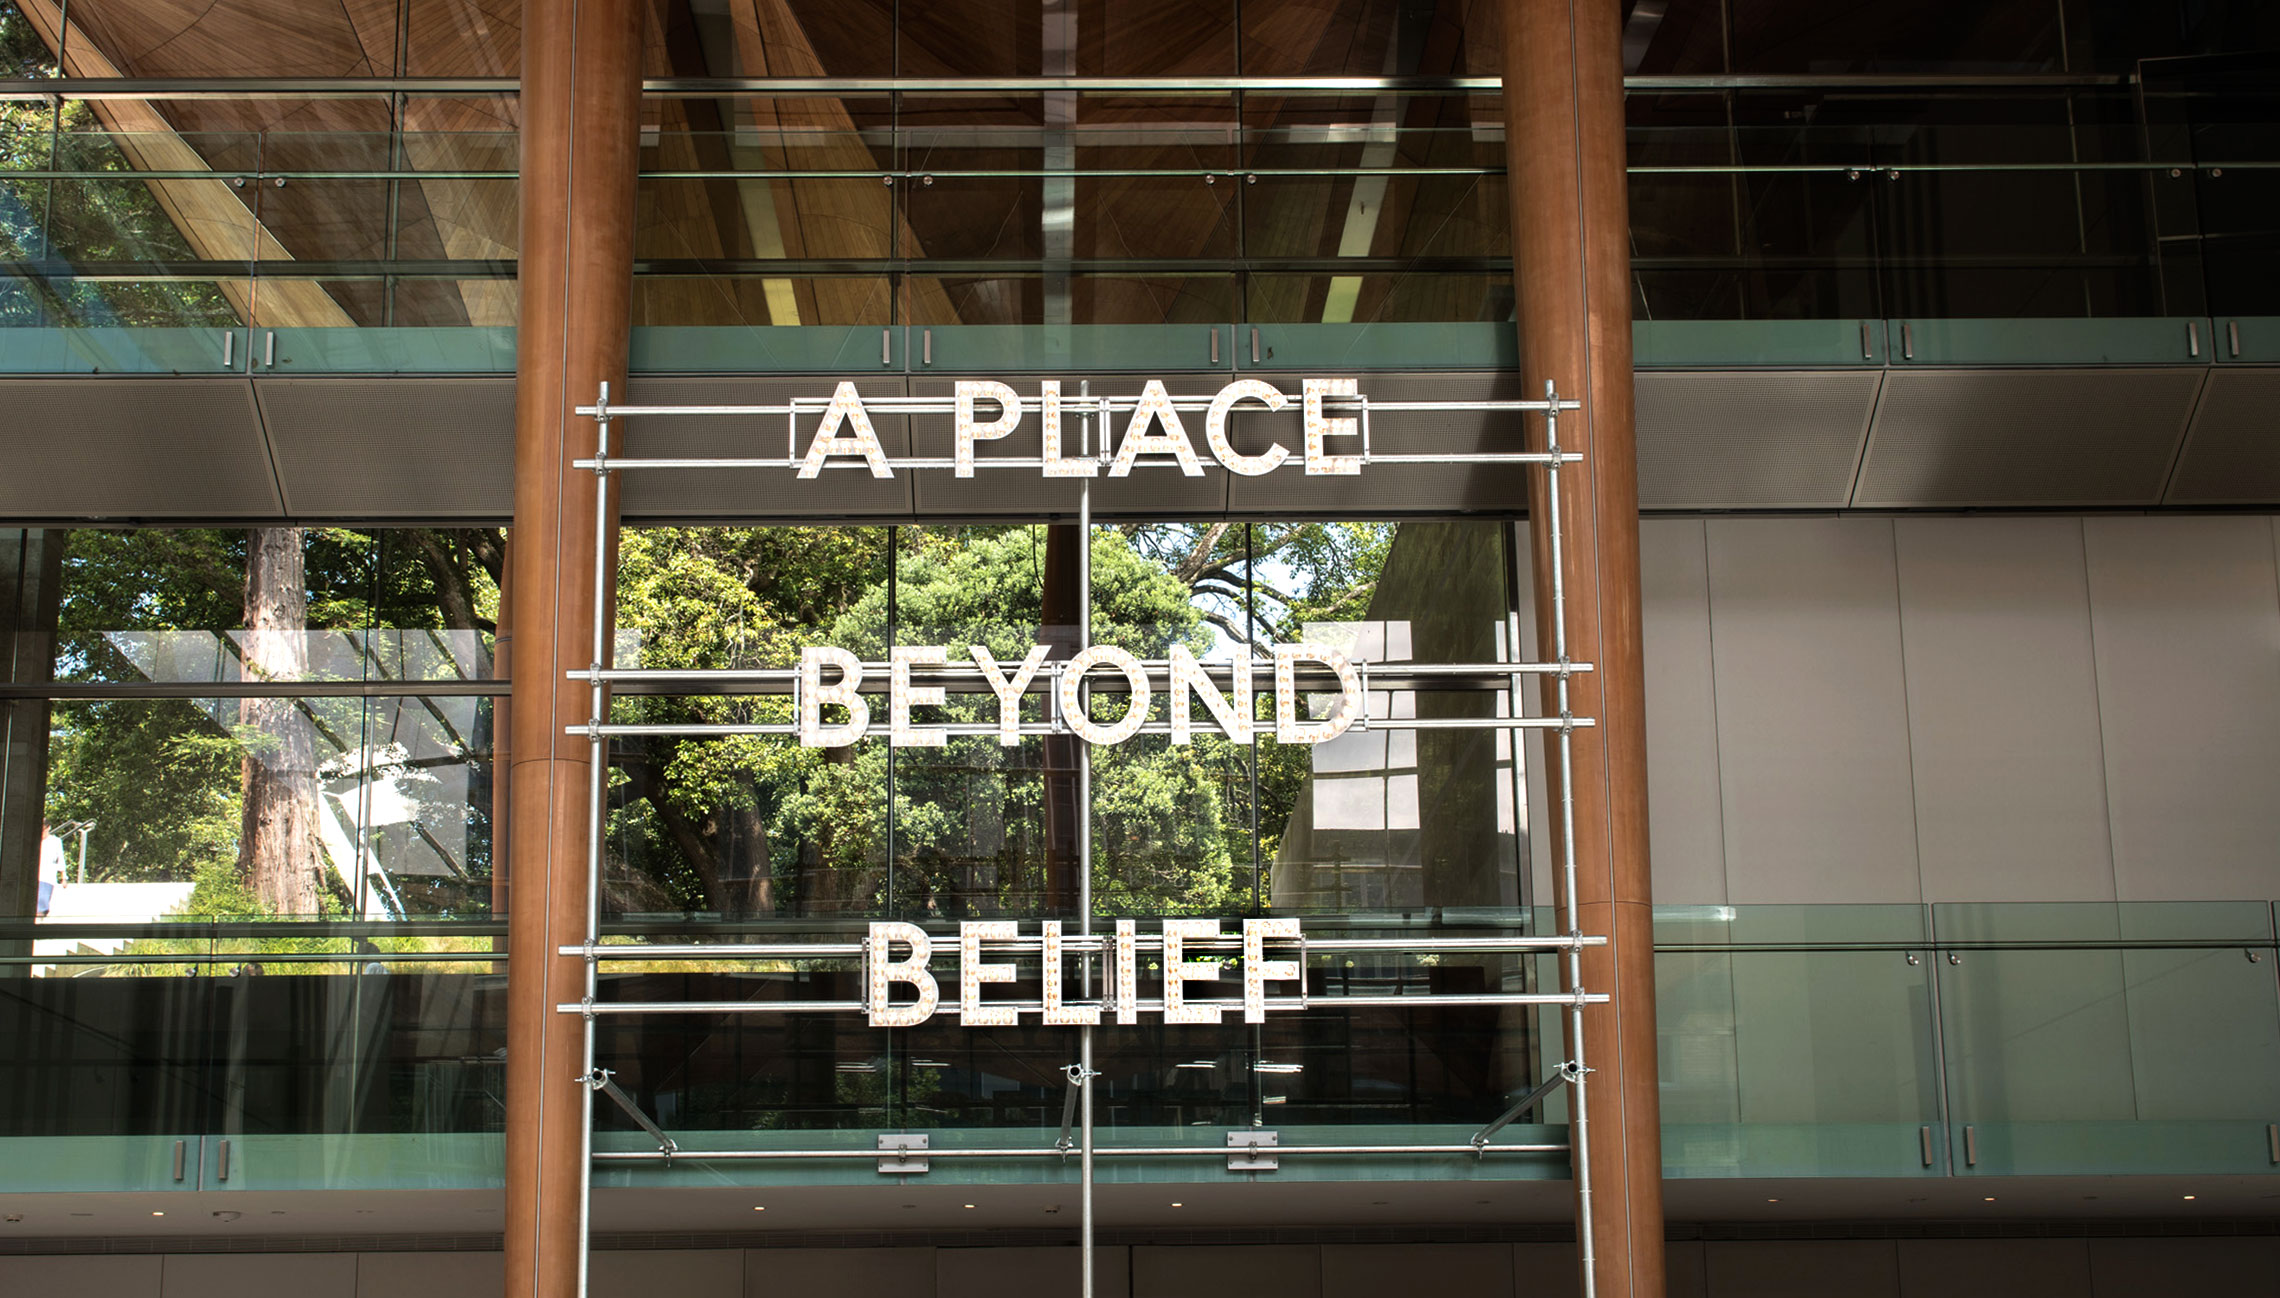 Nathan Coley: A Place Beyond Belief